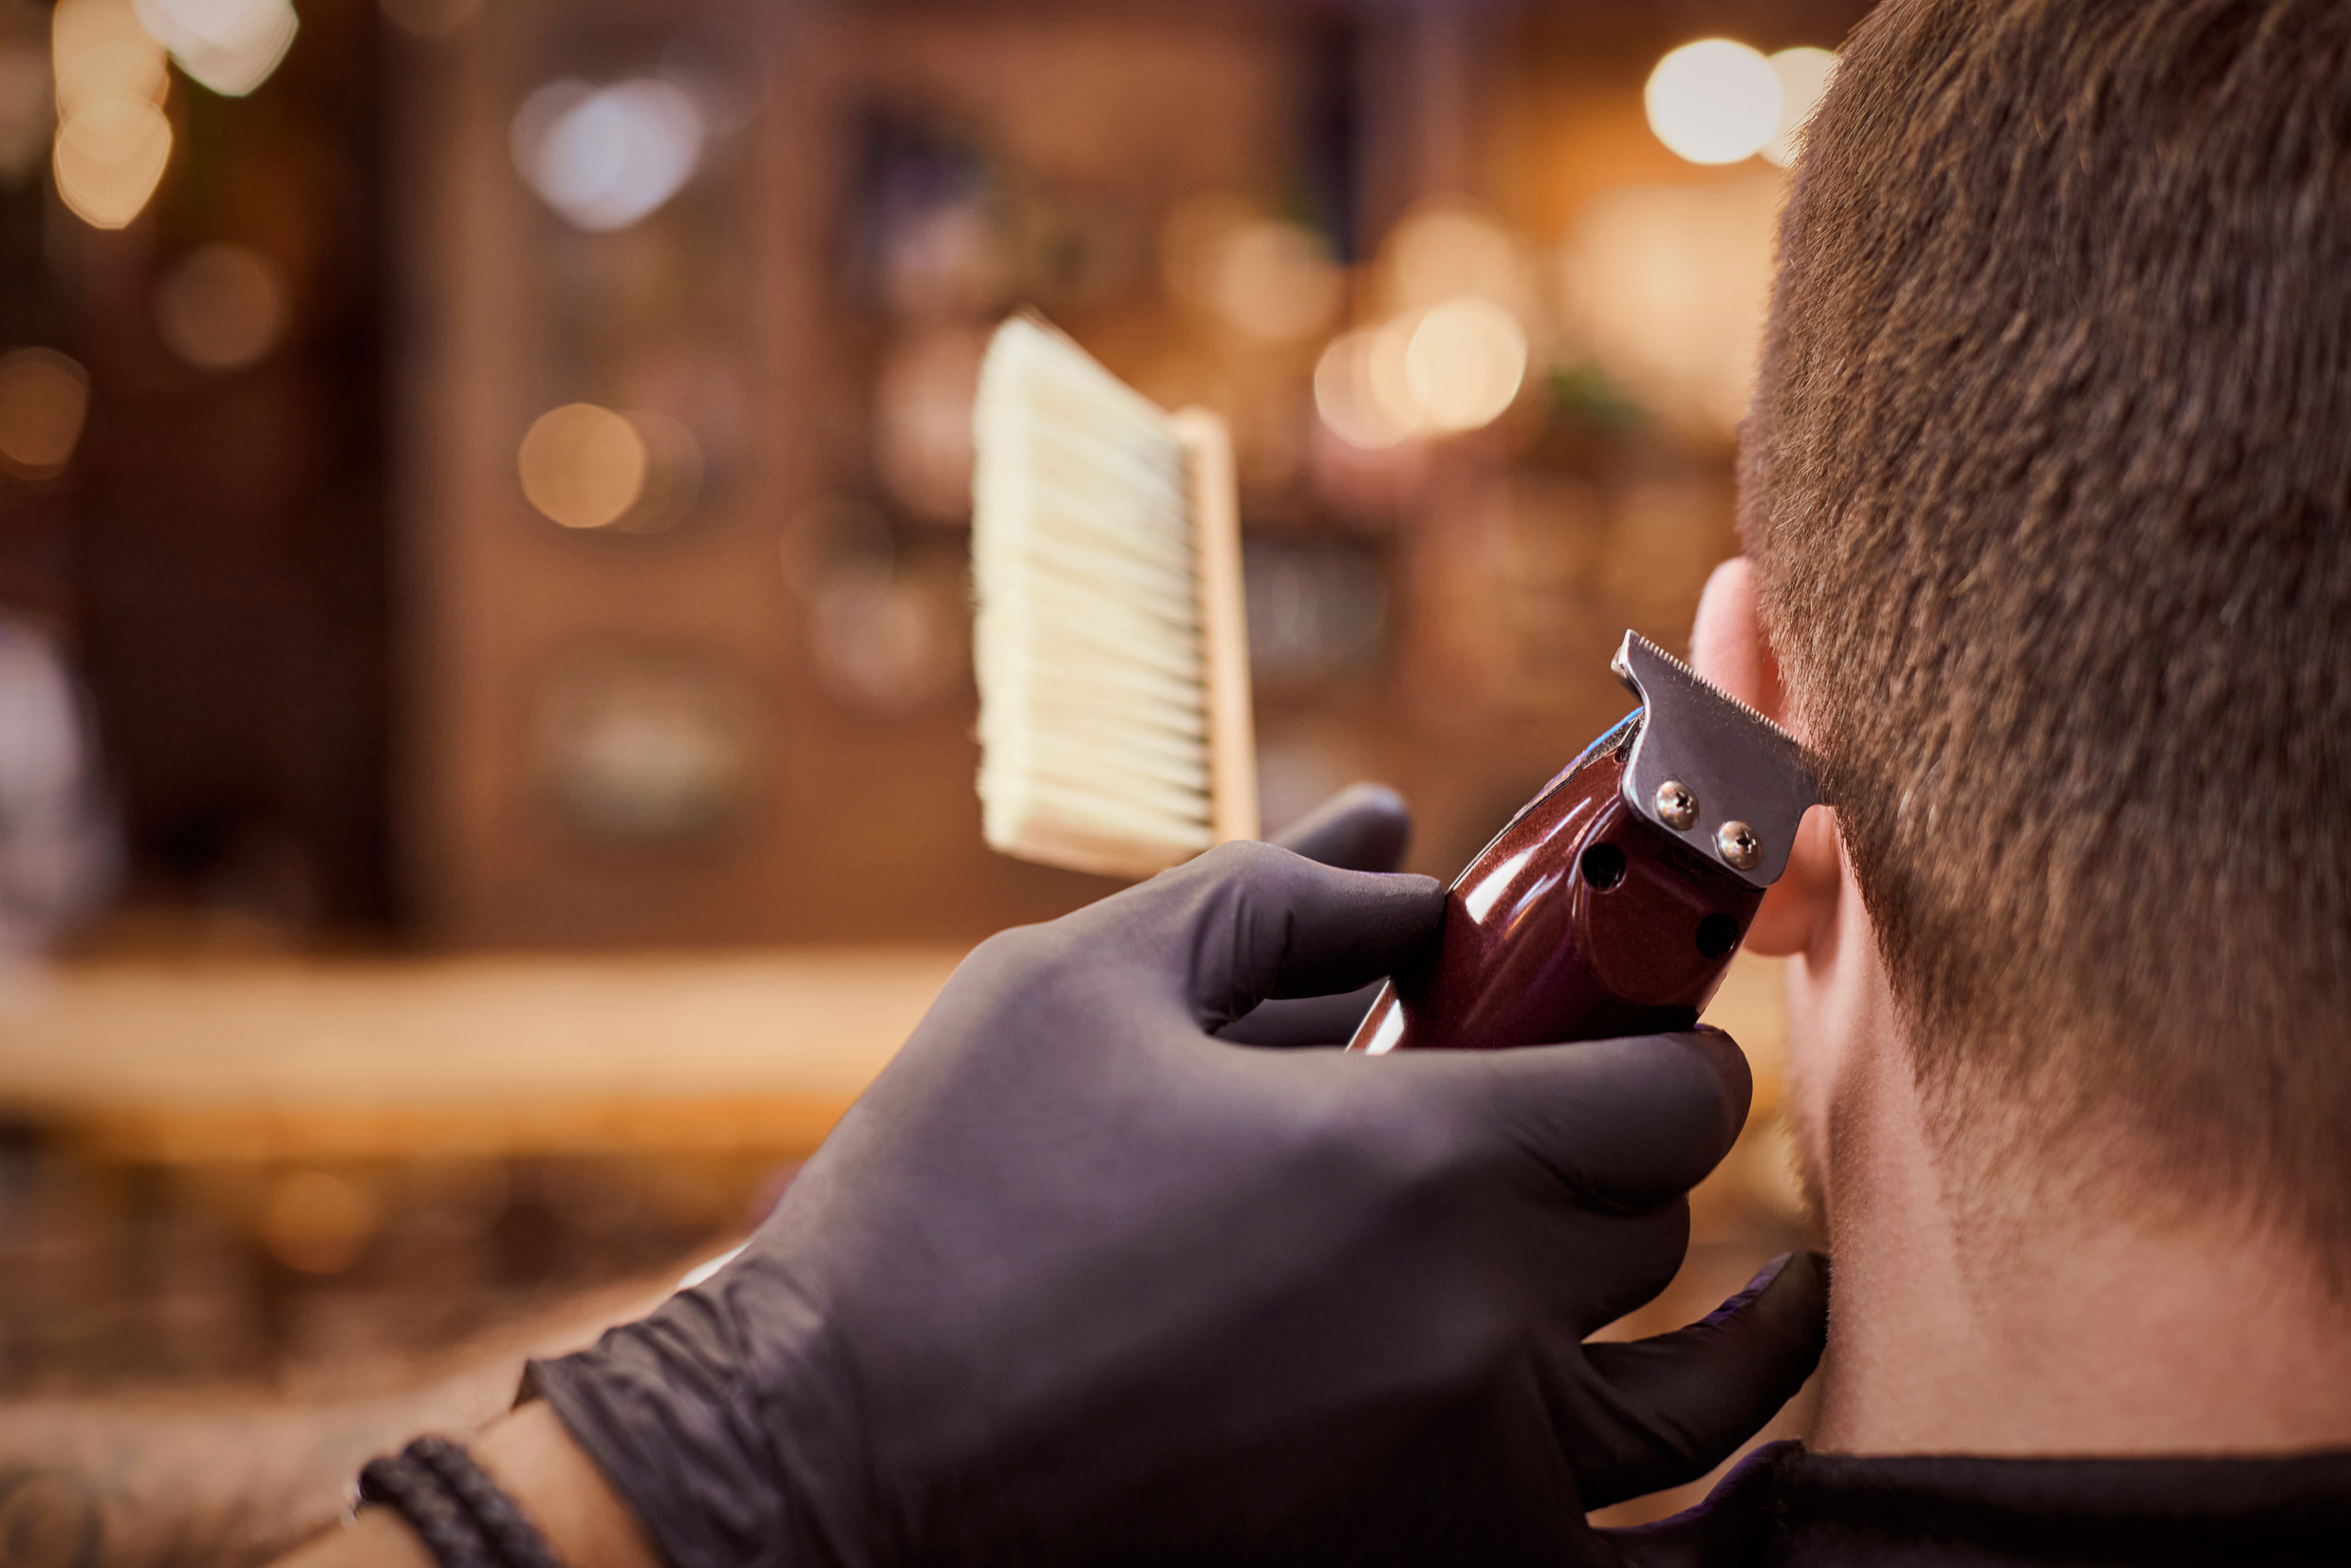 Male haircut trimming in barbershop, client getting haircut by hairdresser with clipper, hairbrush